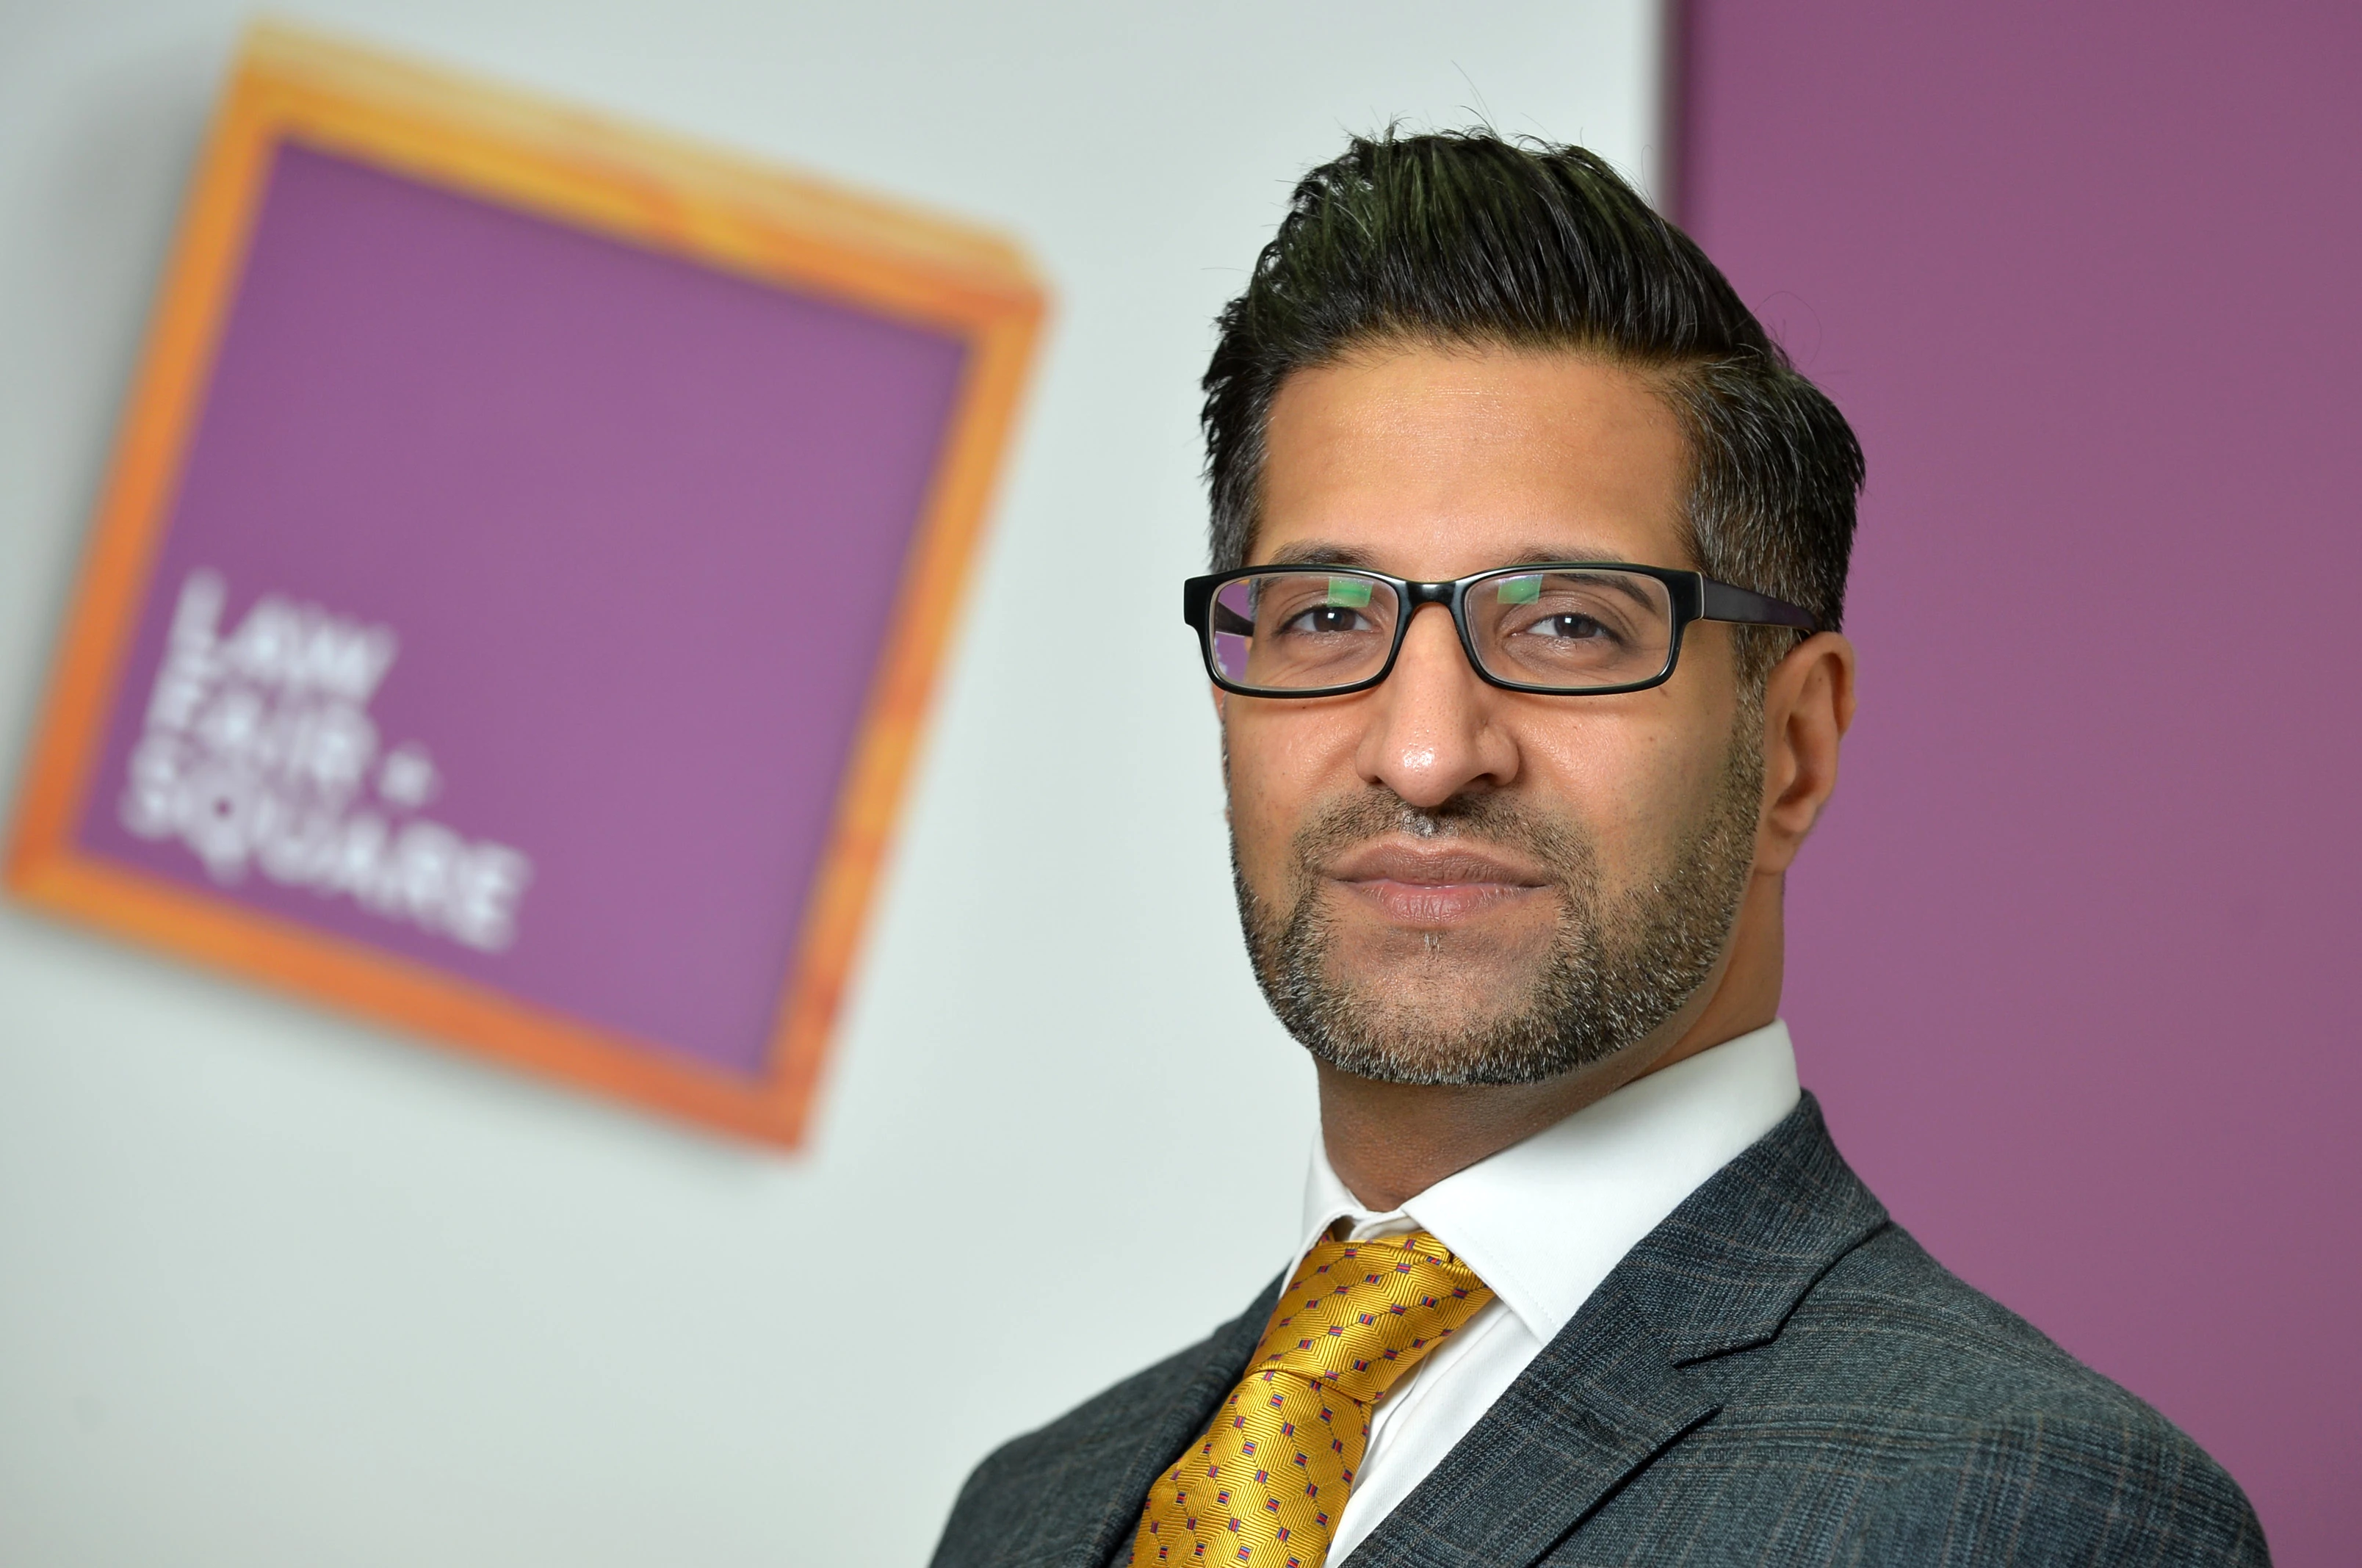  Associate solicitor Amjed Zaman from LCF Law. 